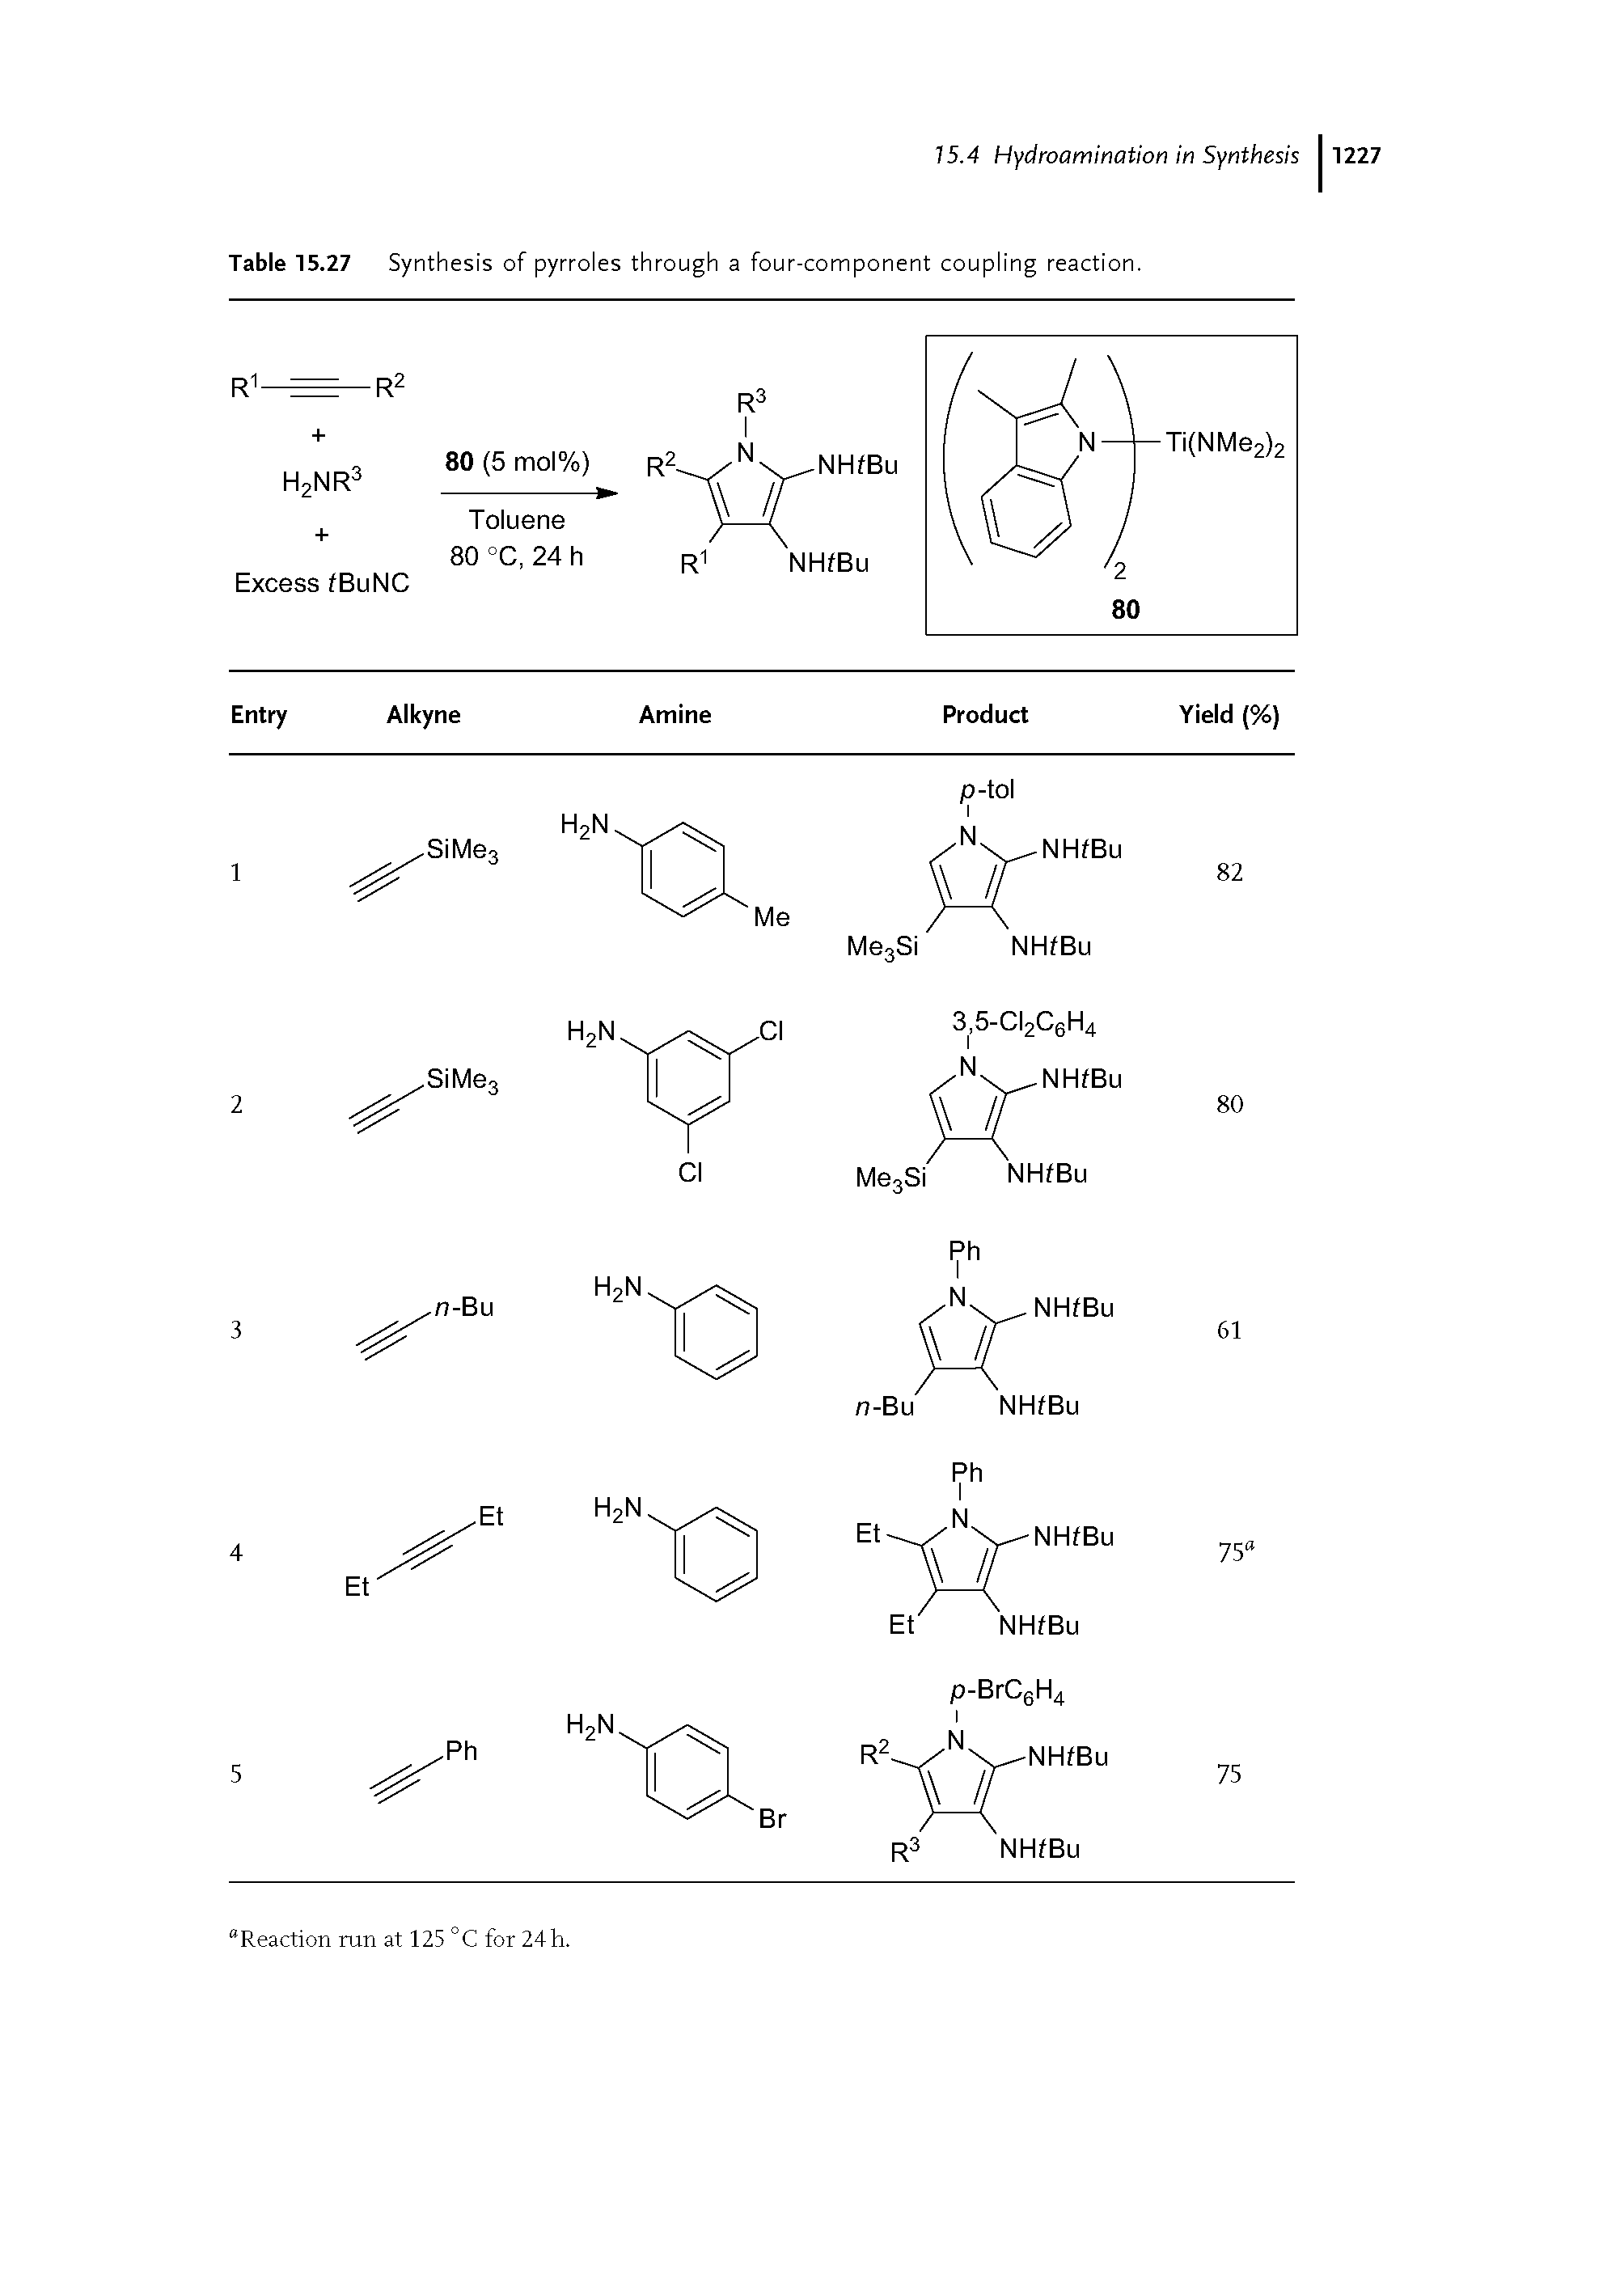 Table 15.27 Synthesis of pyrroles through a four-component coupling reaction.